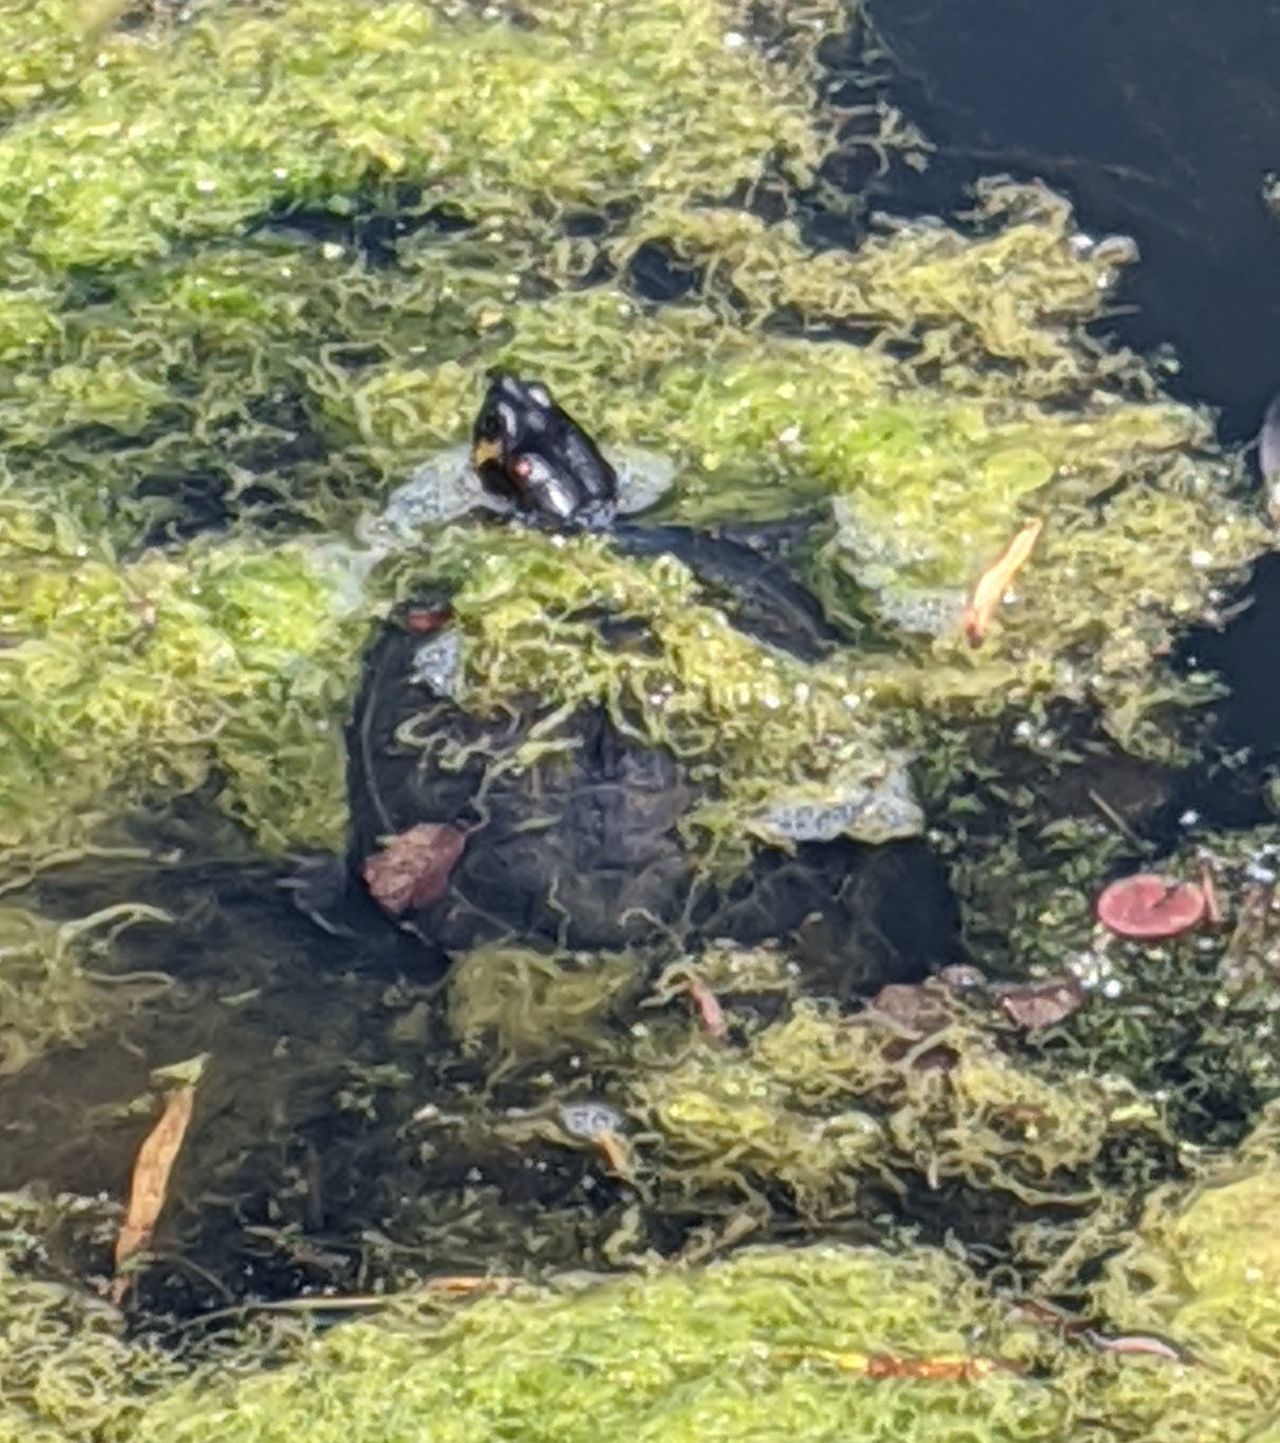 Terrapin found in the Forth and Clyde Canal.